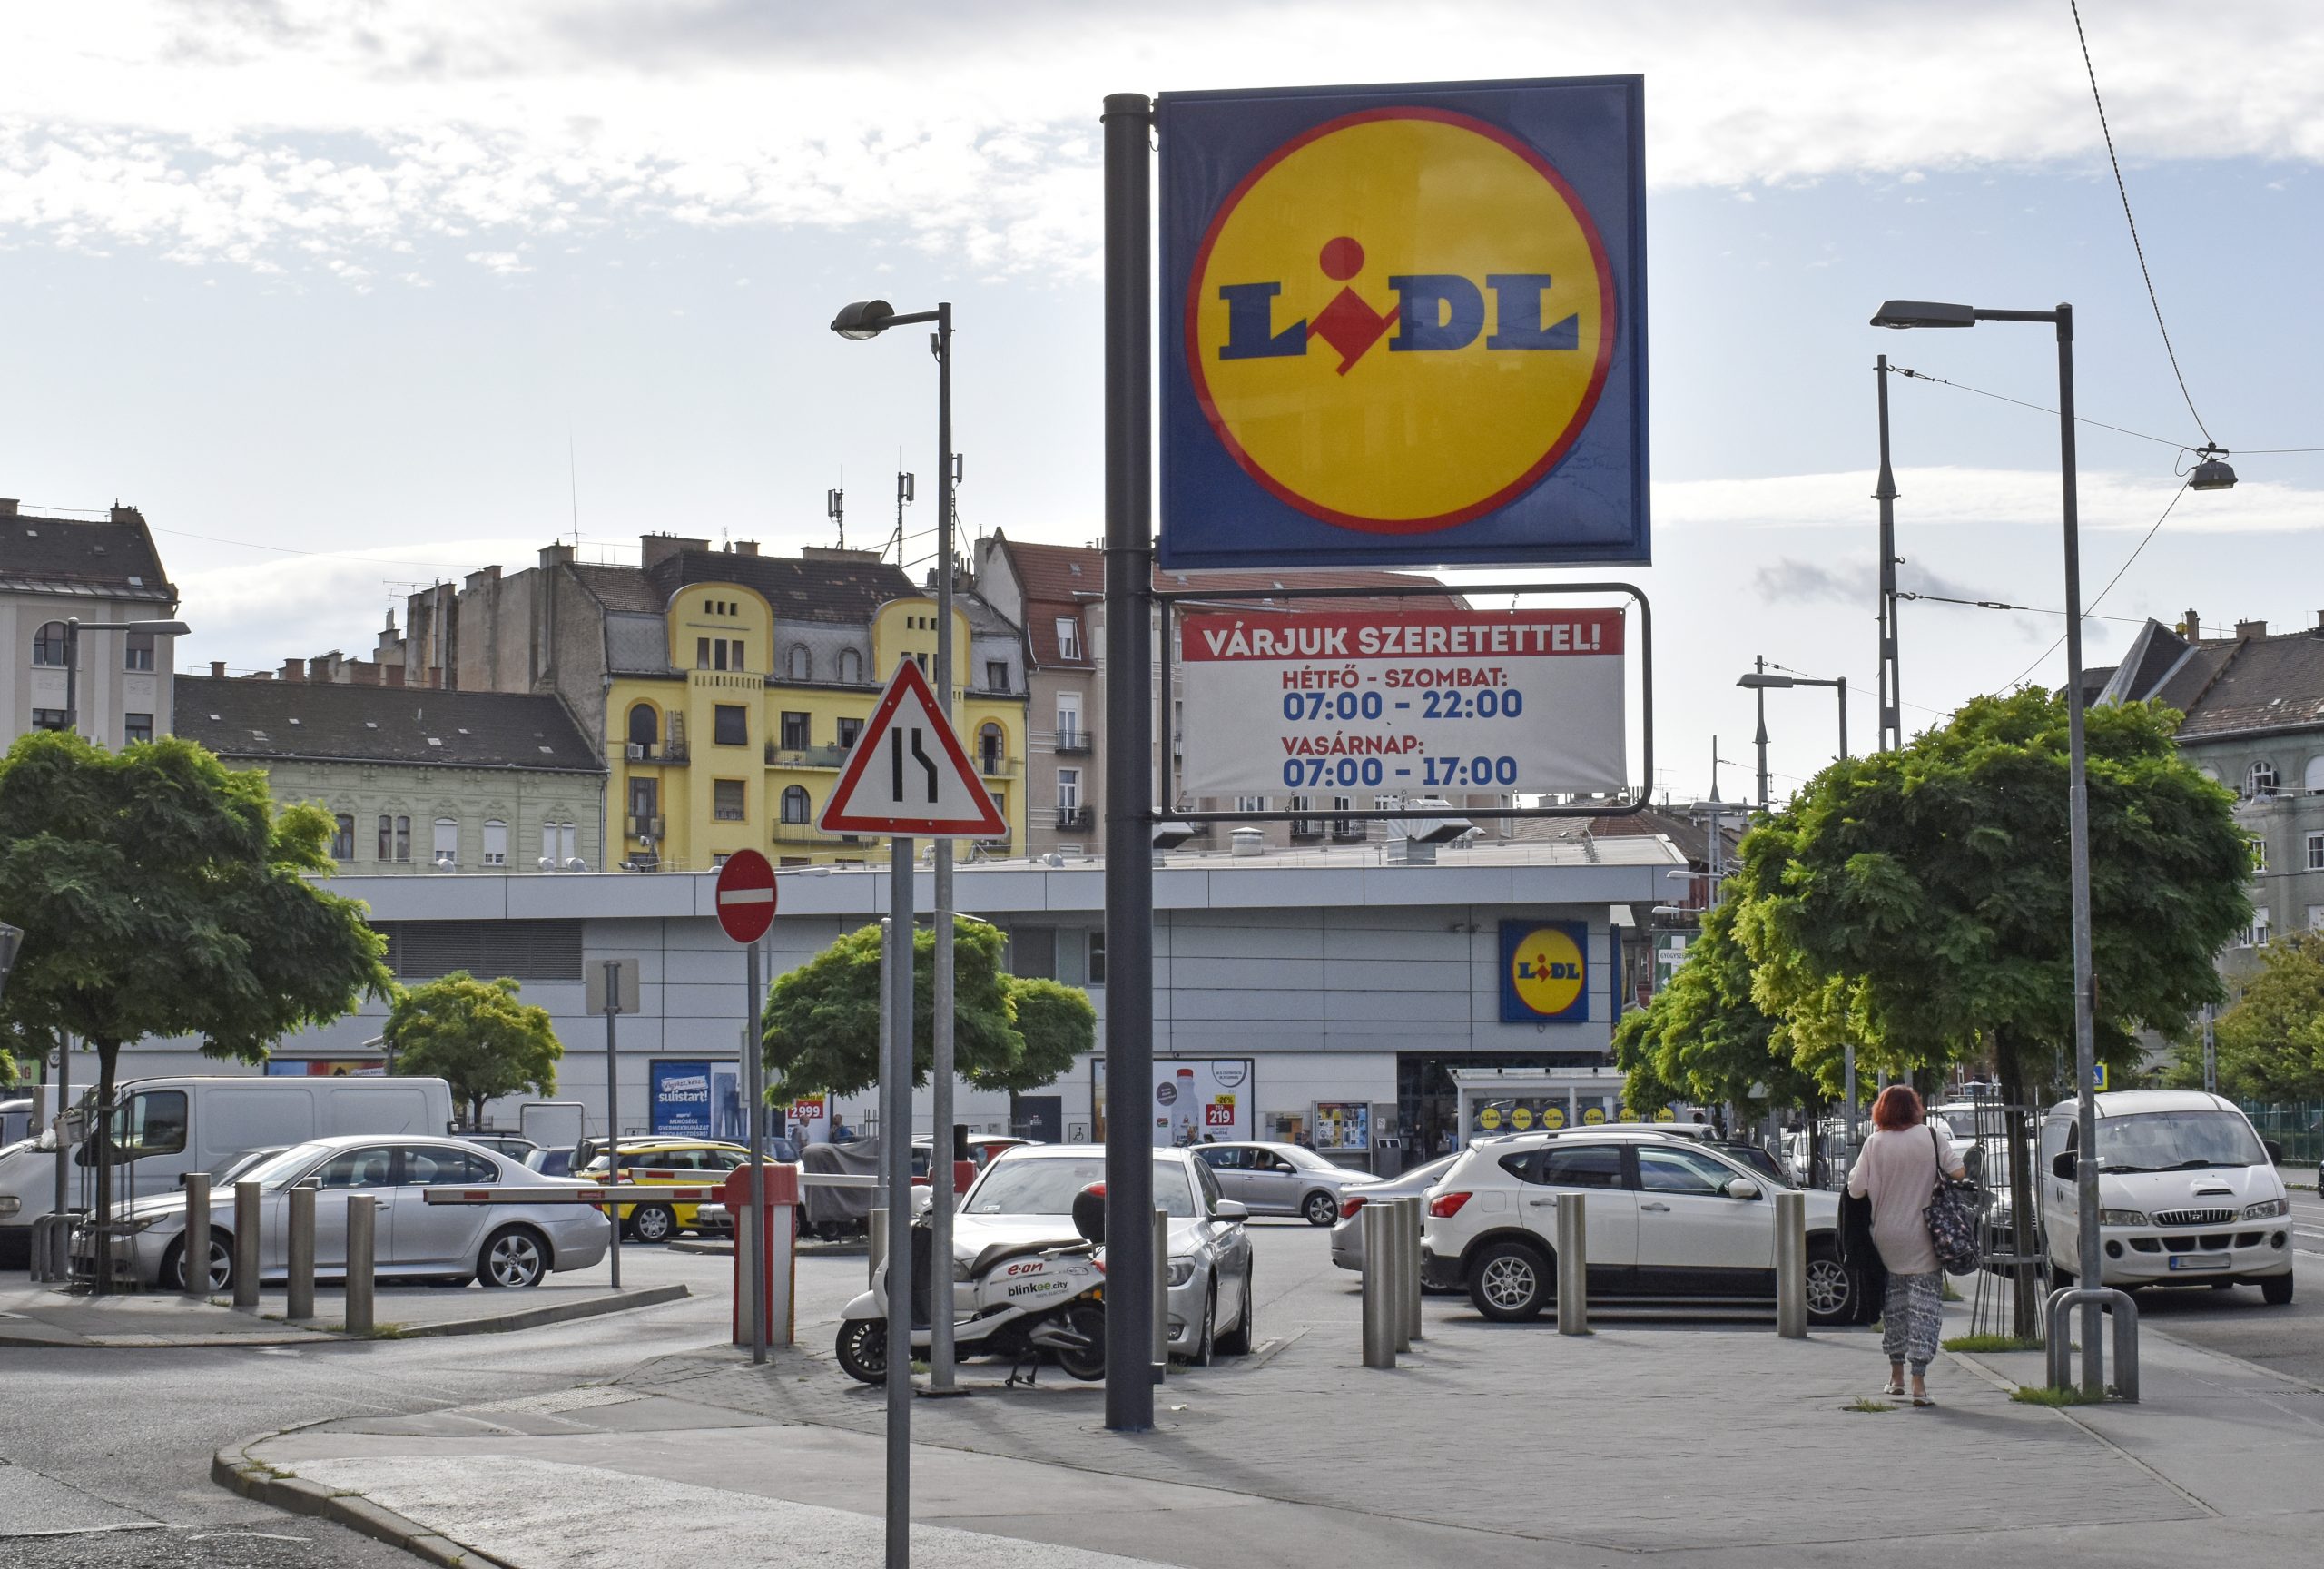 Lidl Introduces Quantity Restriction in Response to Price Cap